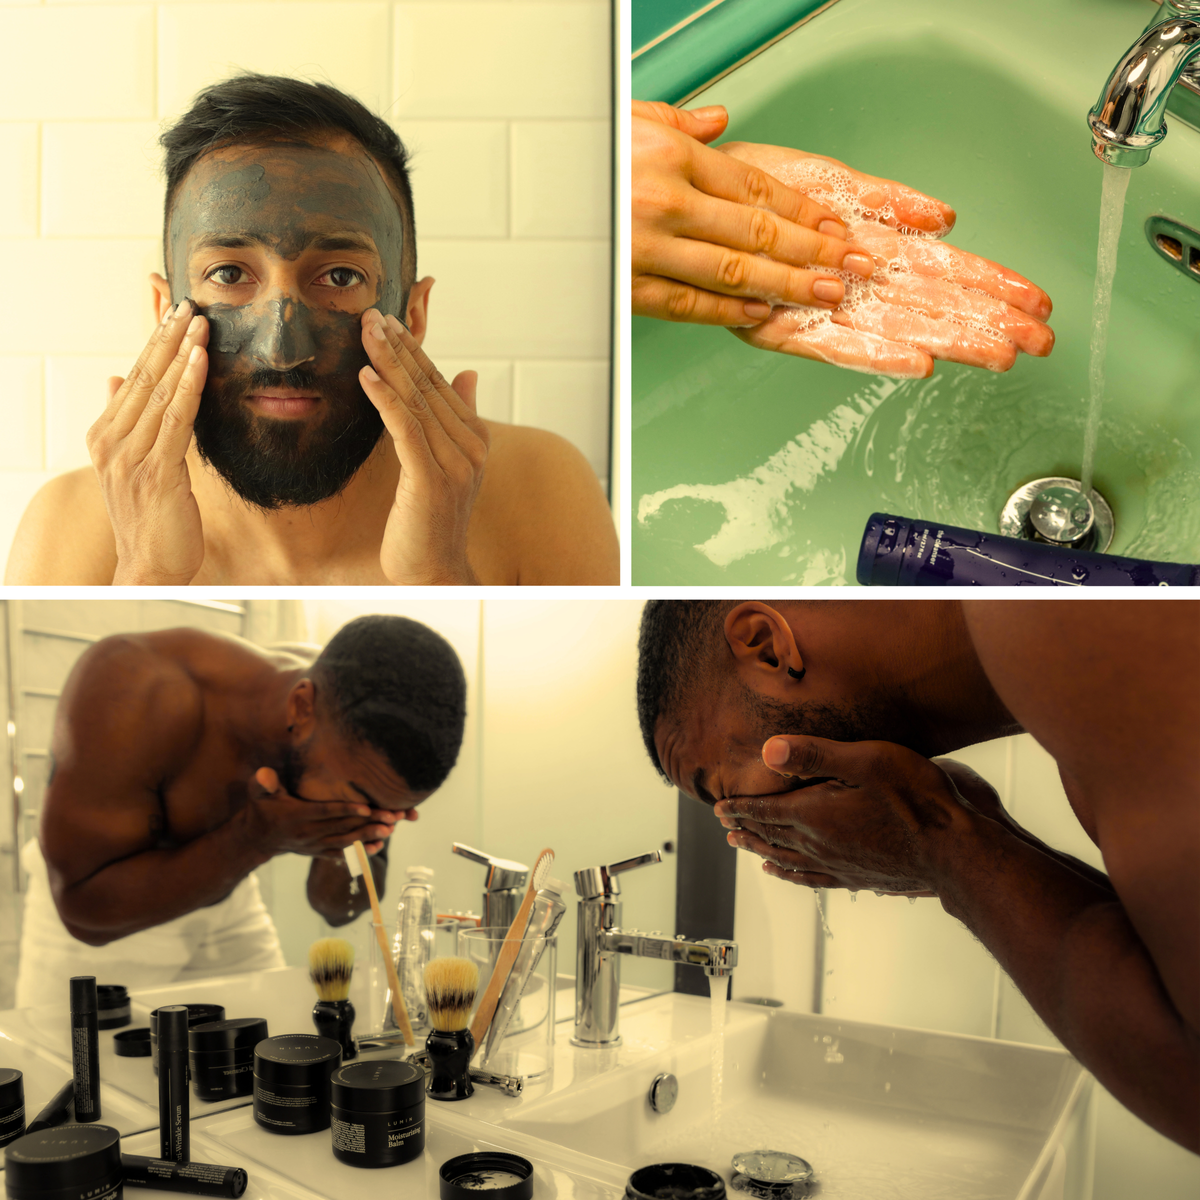 Men Applying Skin Care Products to face.